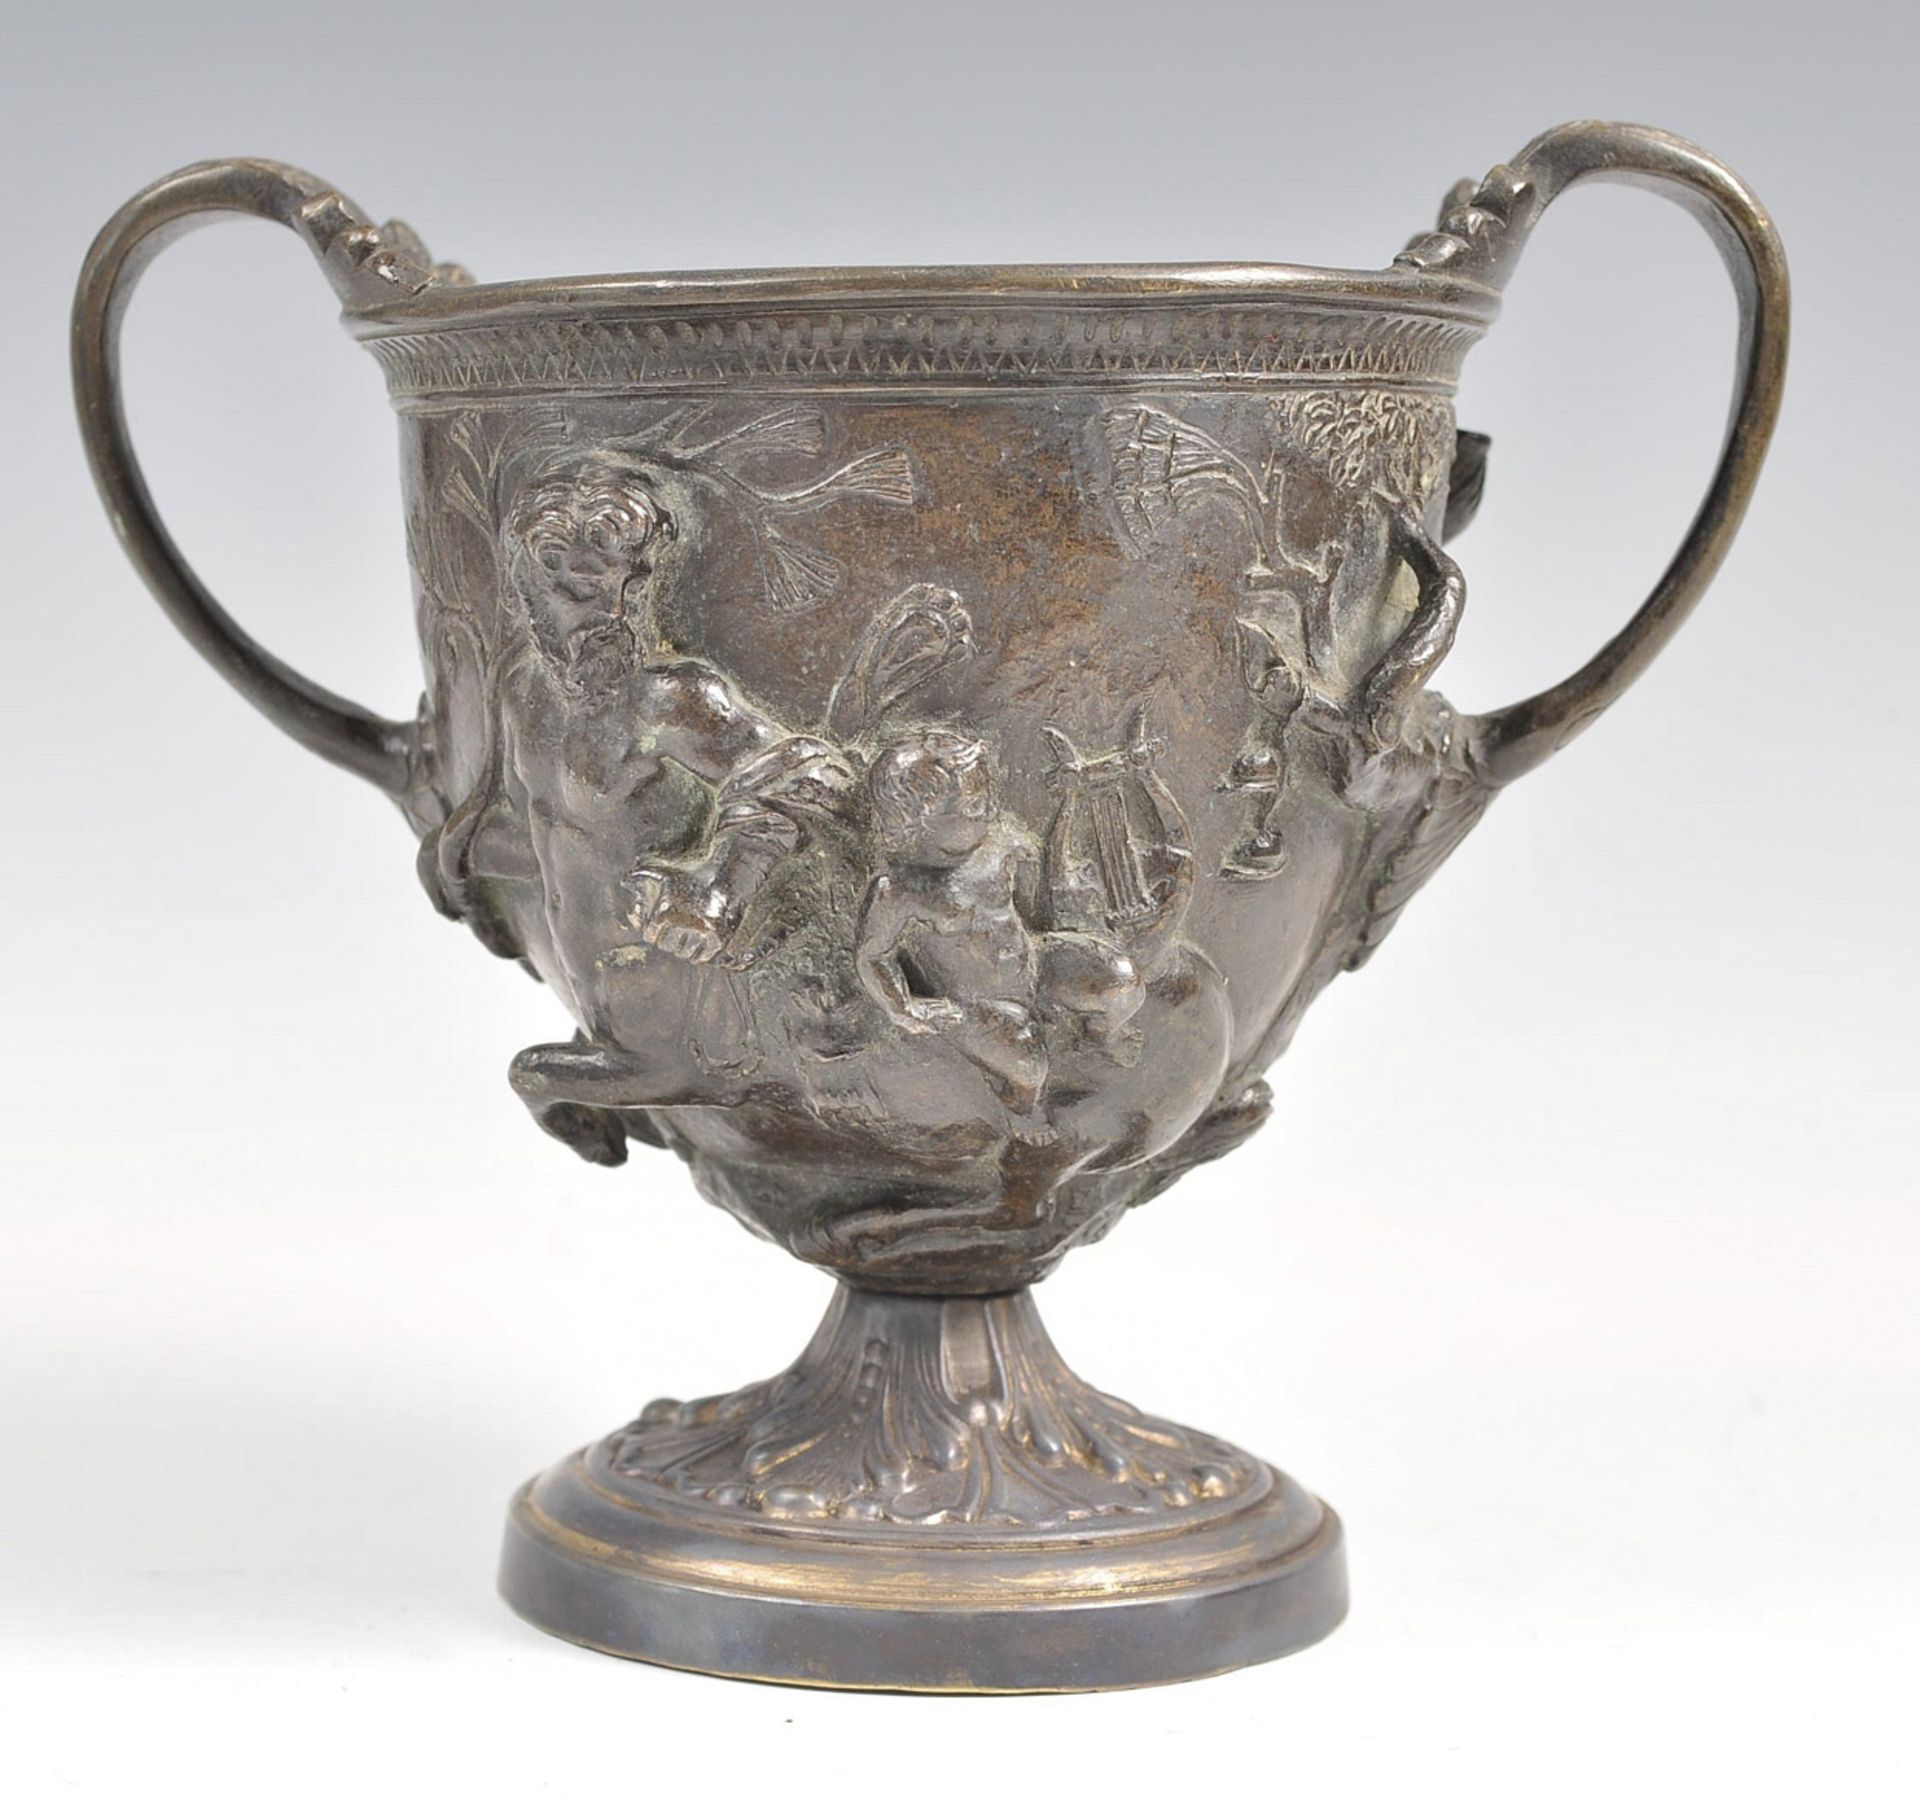 Early C19th grand tour bronze chalice cup decorated with classical figures